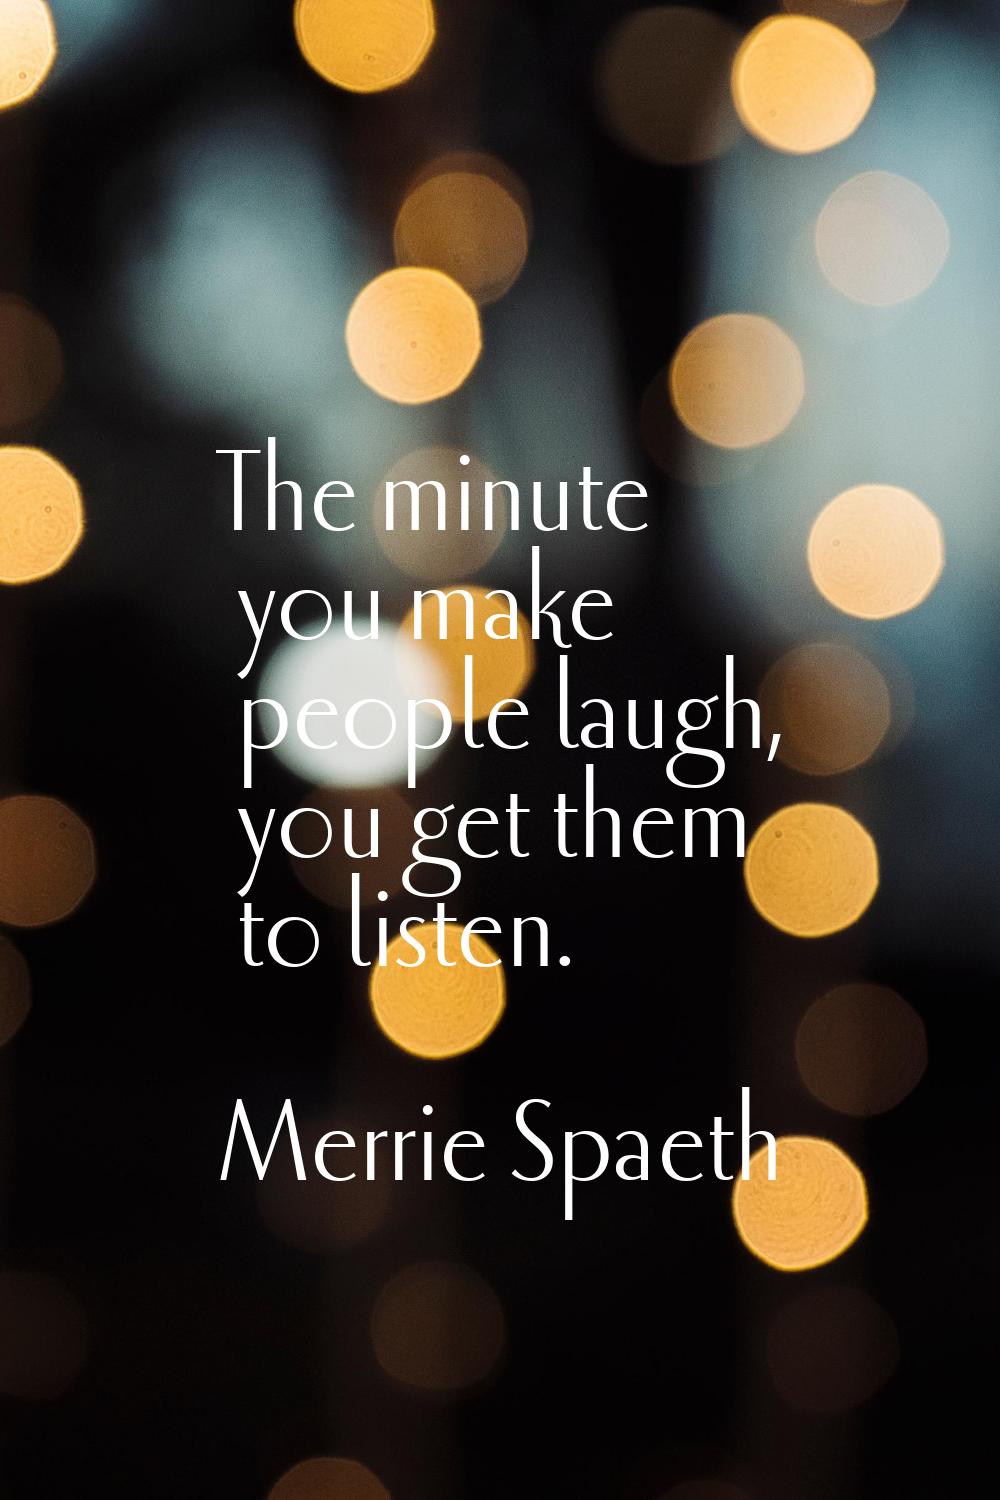 The minute you make people laugh, you get them to listen.